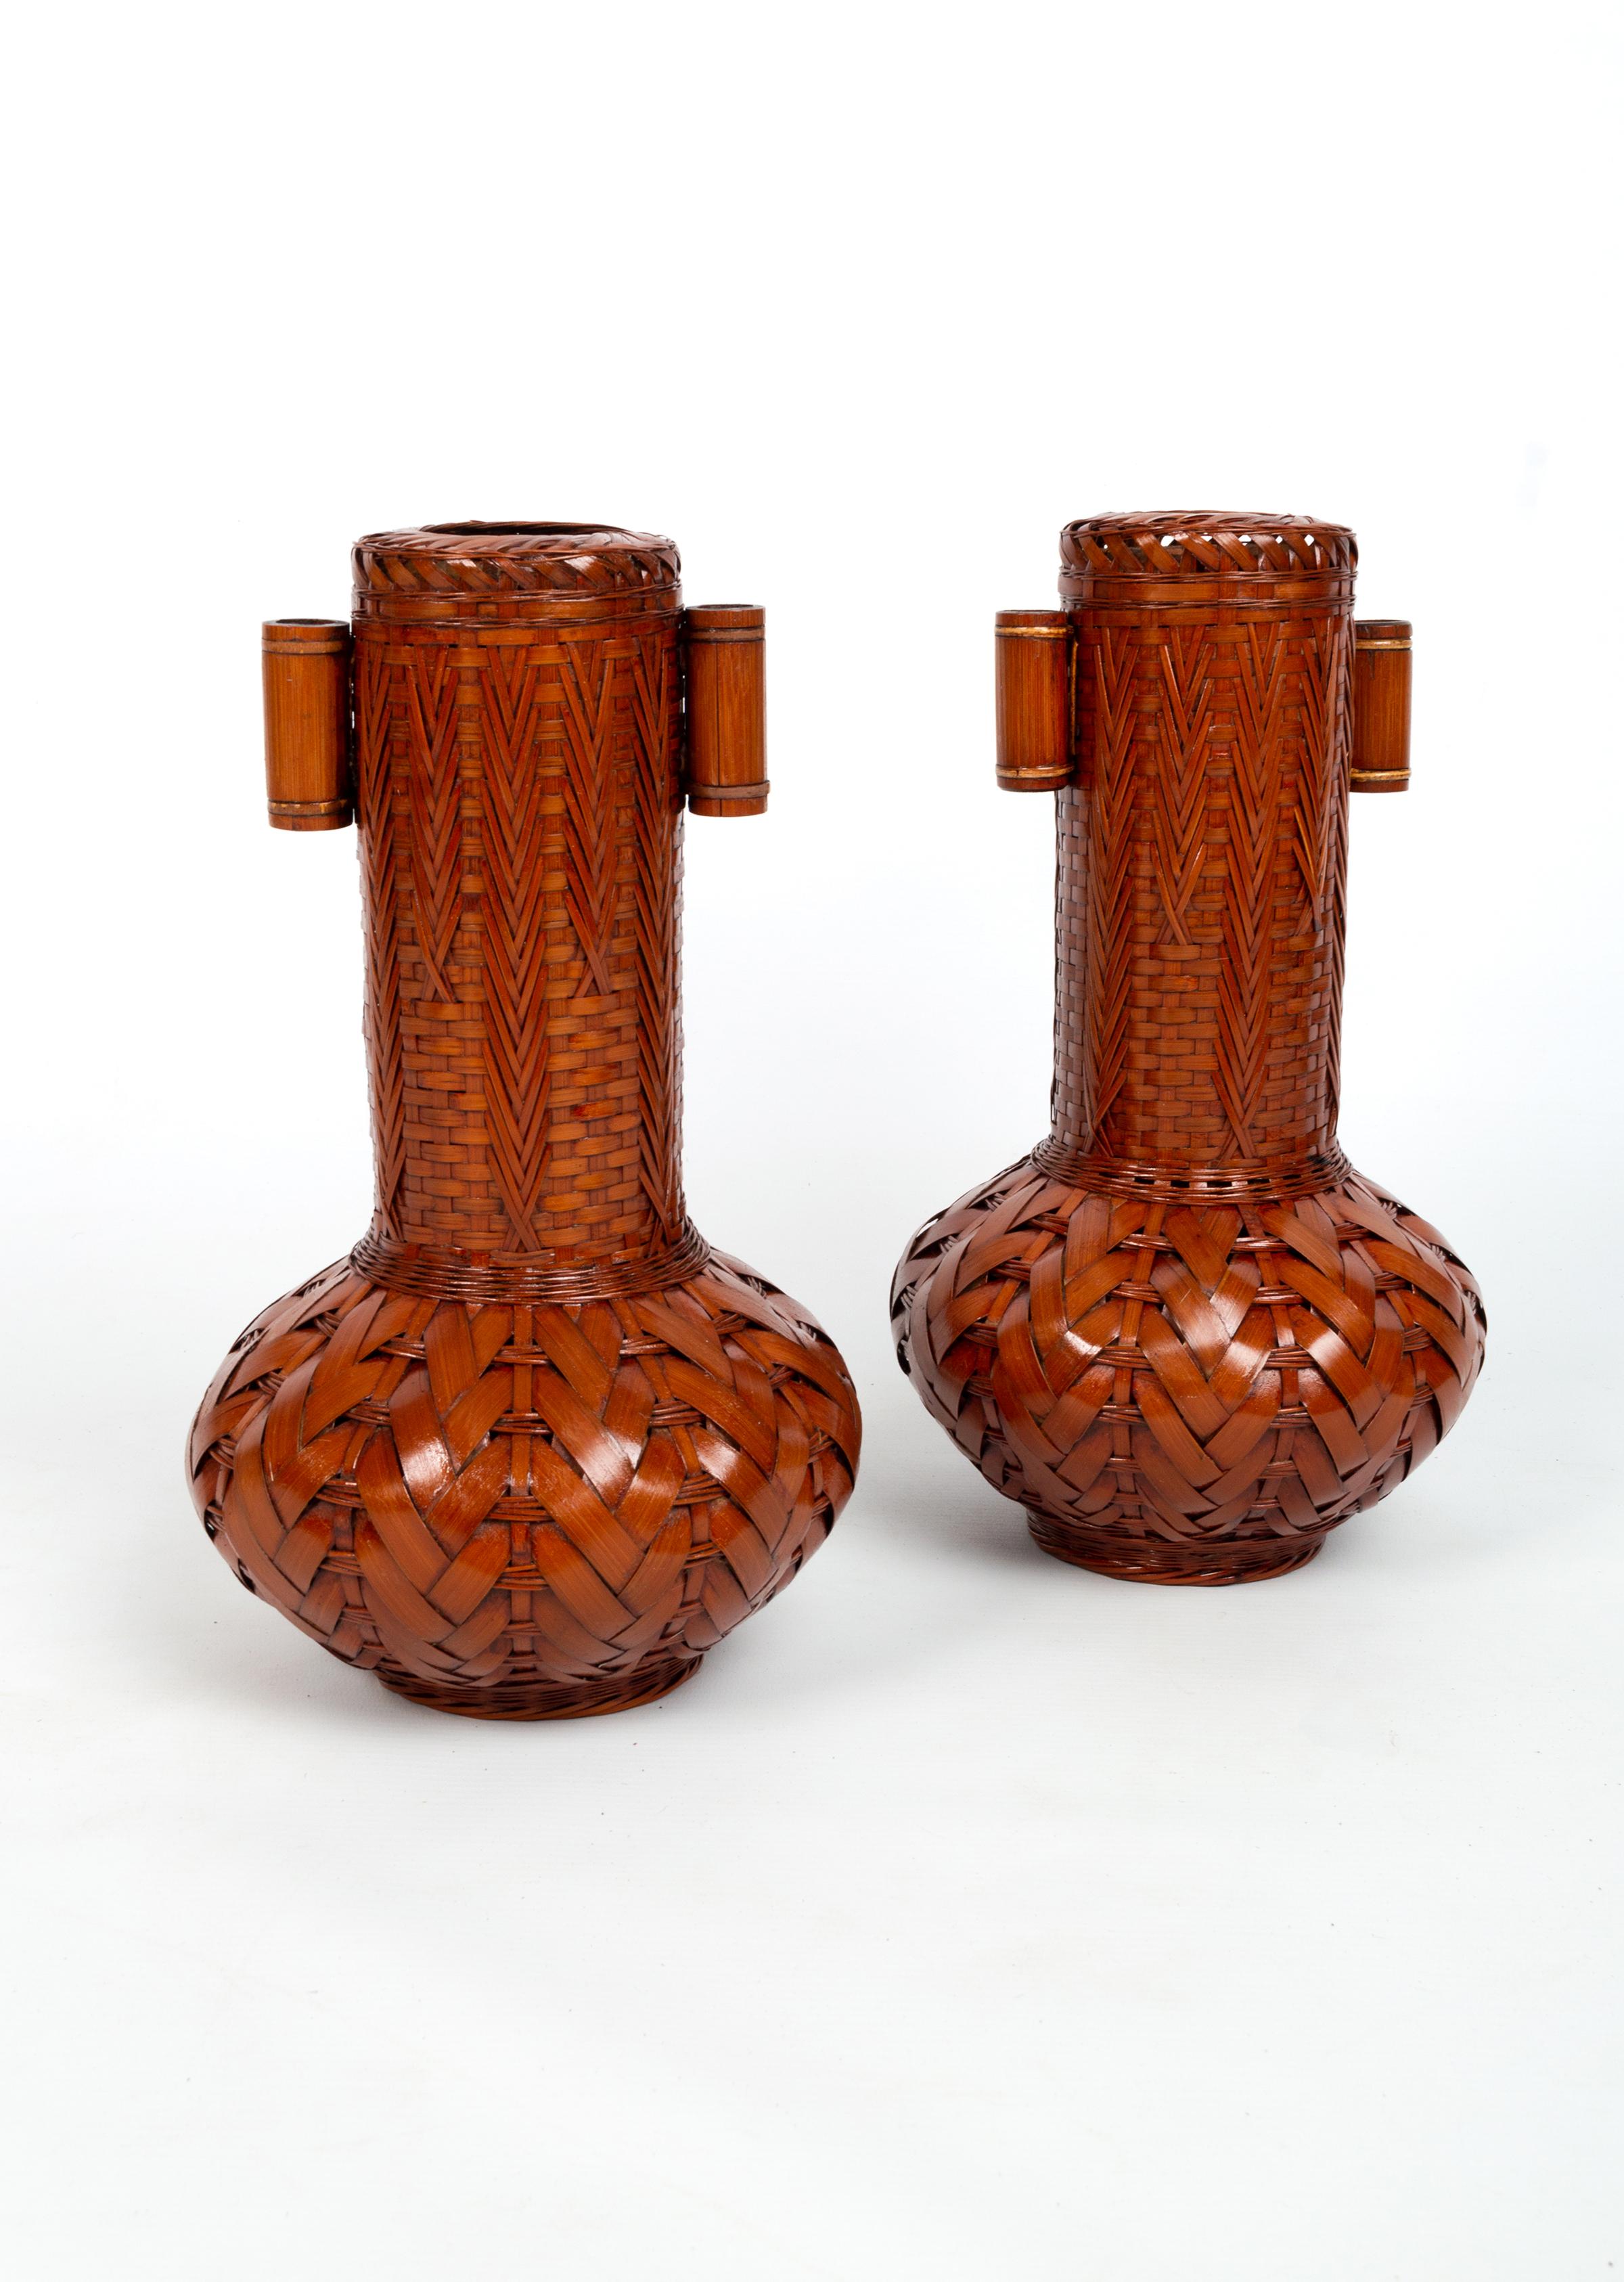 Pair Japanese Lacquered Woven Bamboo Ikebana Vases, Japan, C.1950 In Good Condition For Sale In London, GB